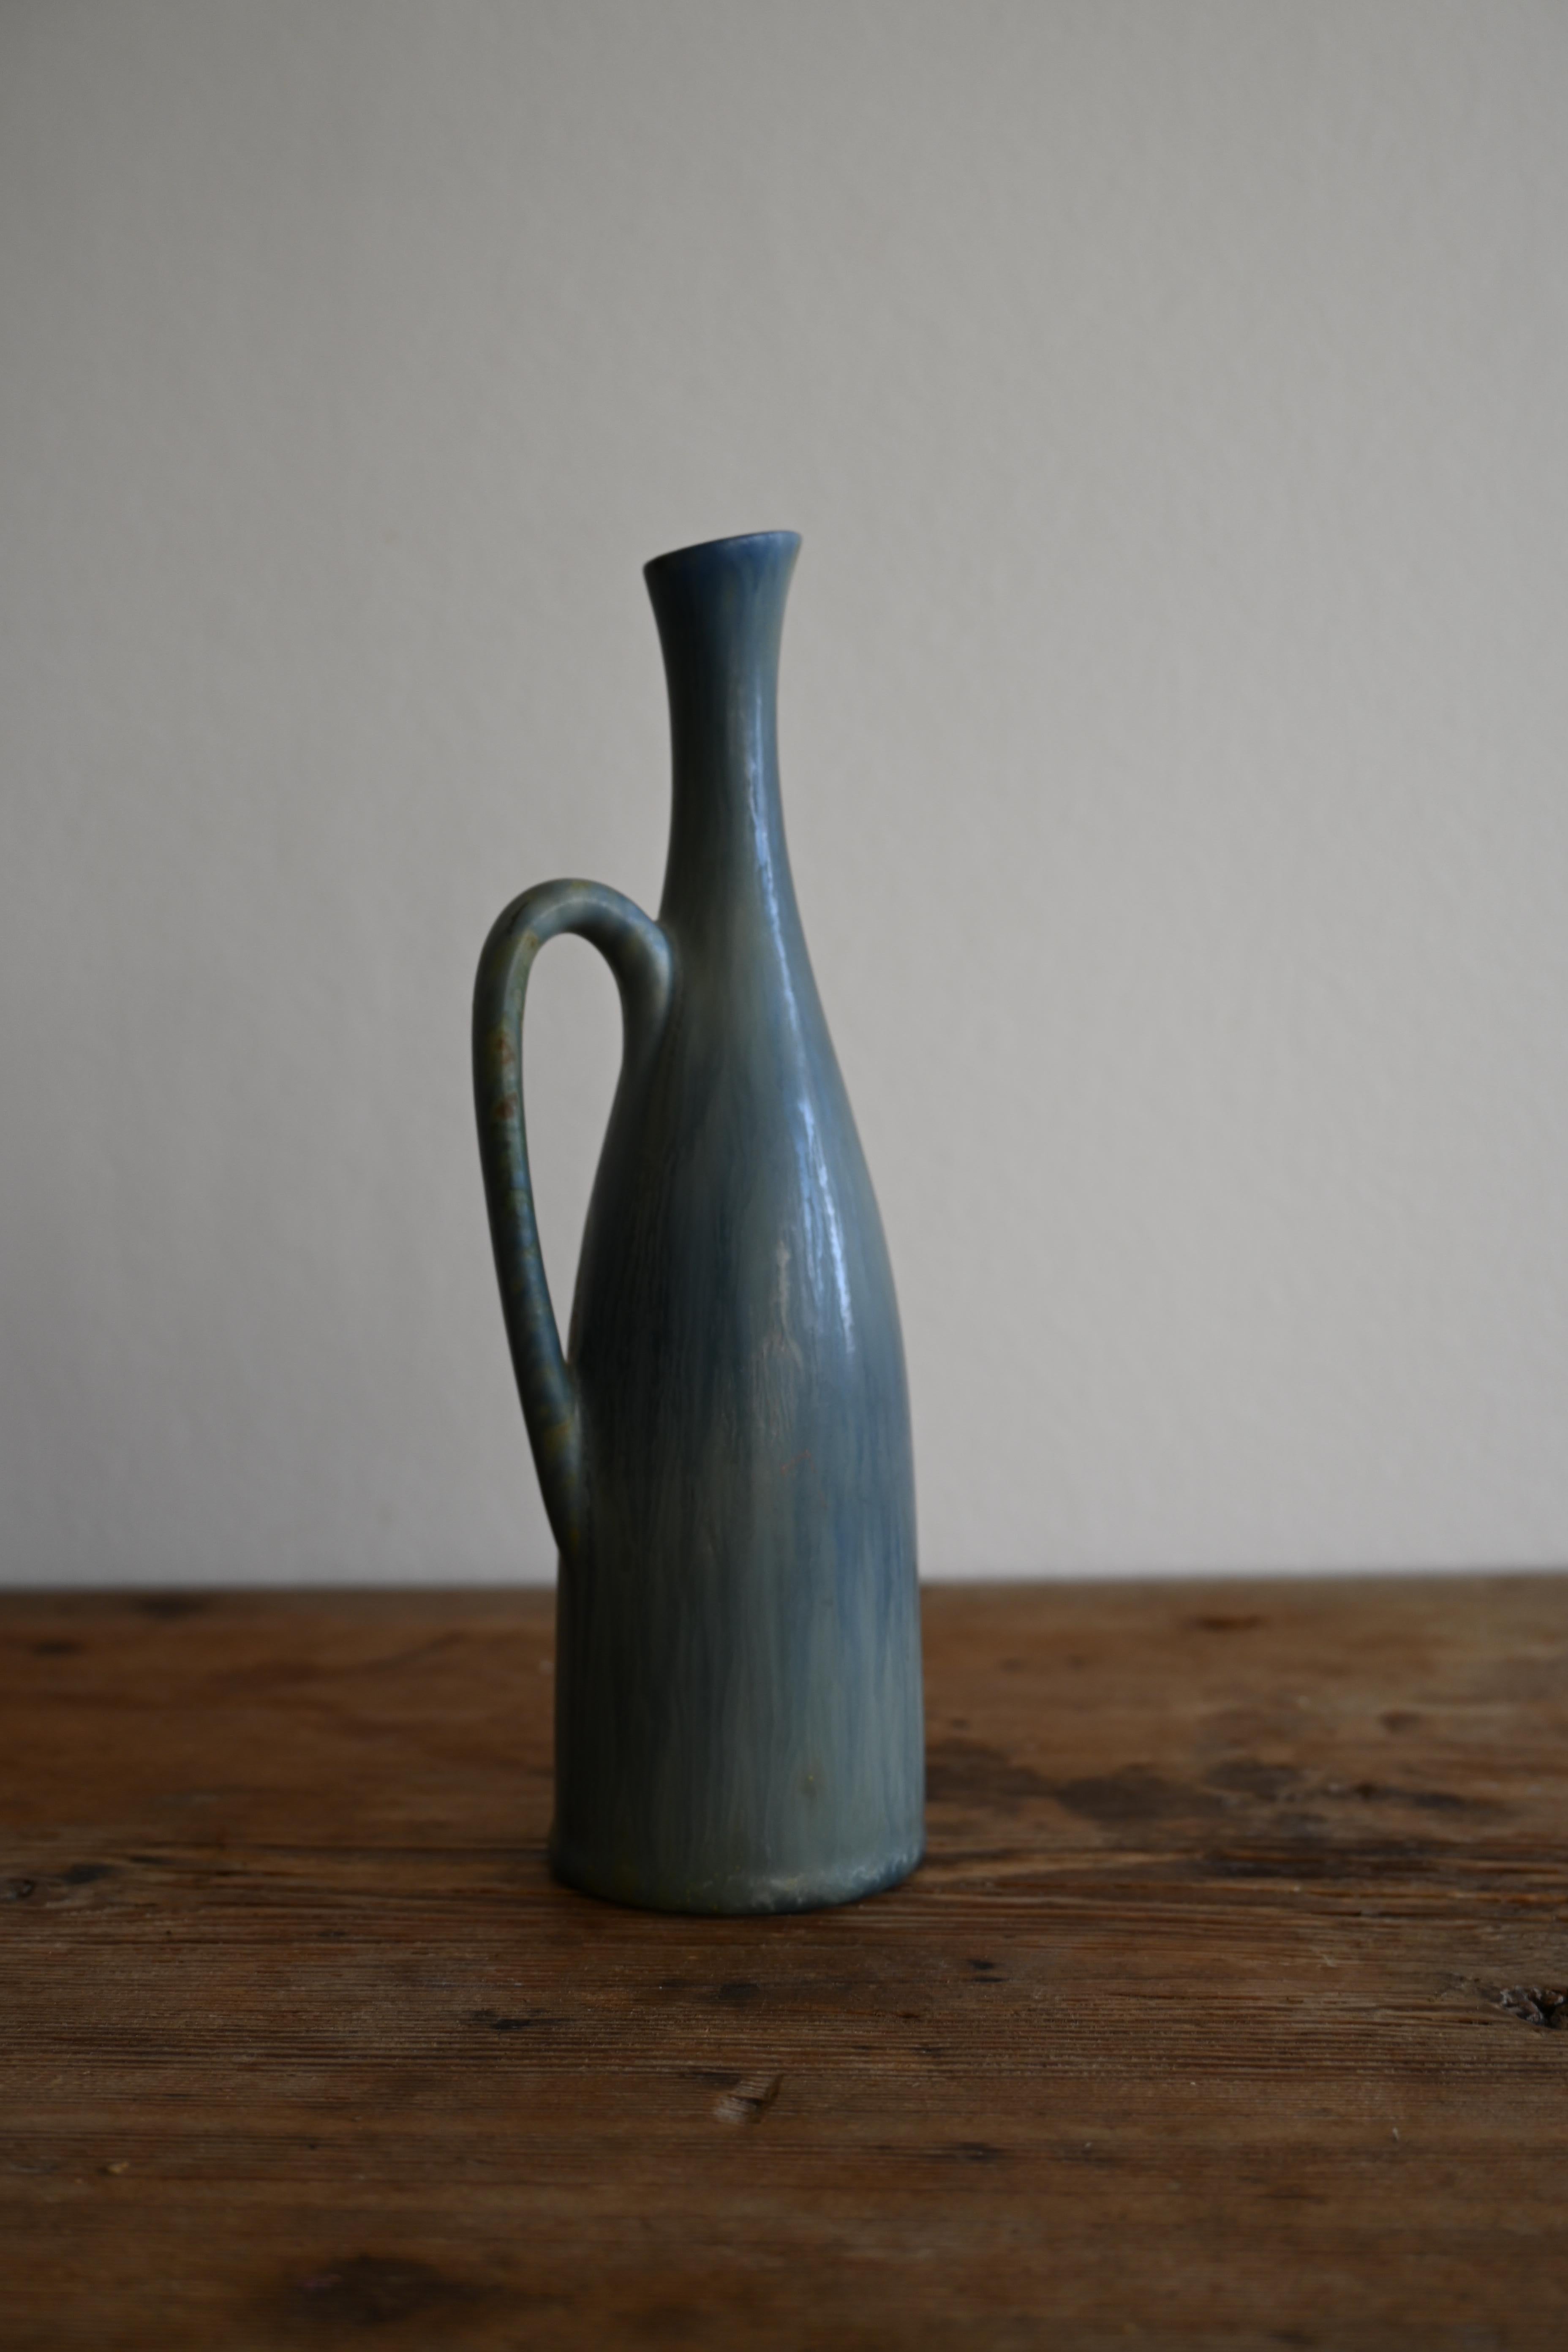 Carl Harry Stålhane for Rörstrand Midcentury Vase 1950s Sweden

The mid-century vase from the 1950s by Carl Harry Stålhane for Rörstrand, Sweden, features an alluring blue glaze, adding a touch of captivating color to the timeless design and